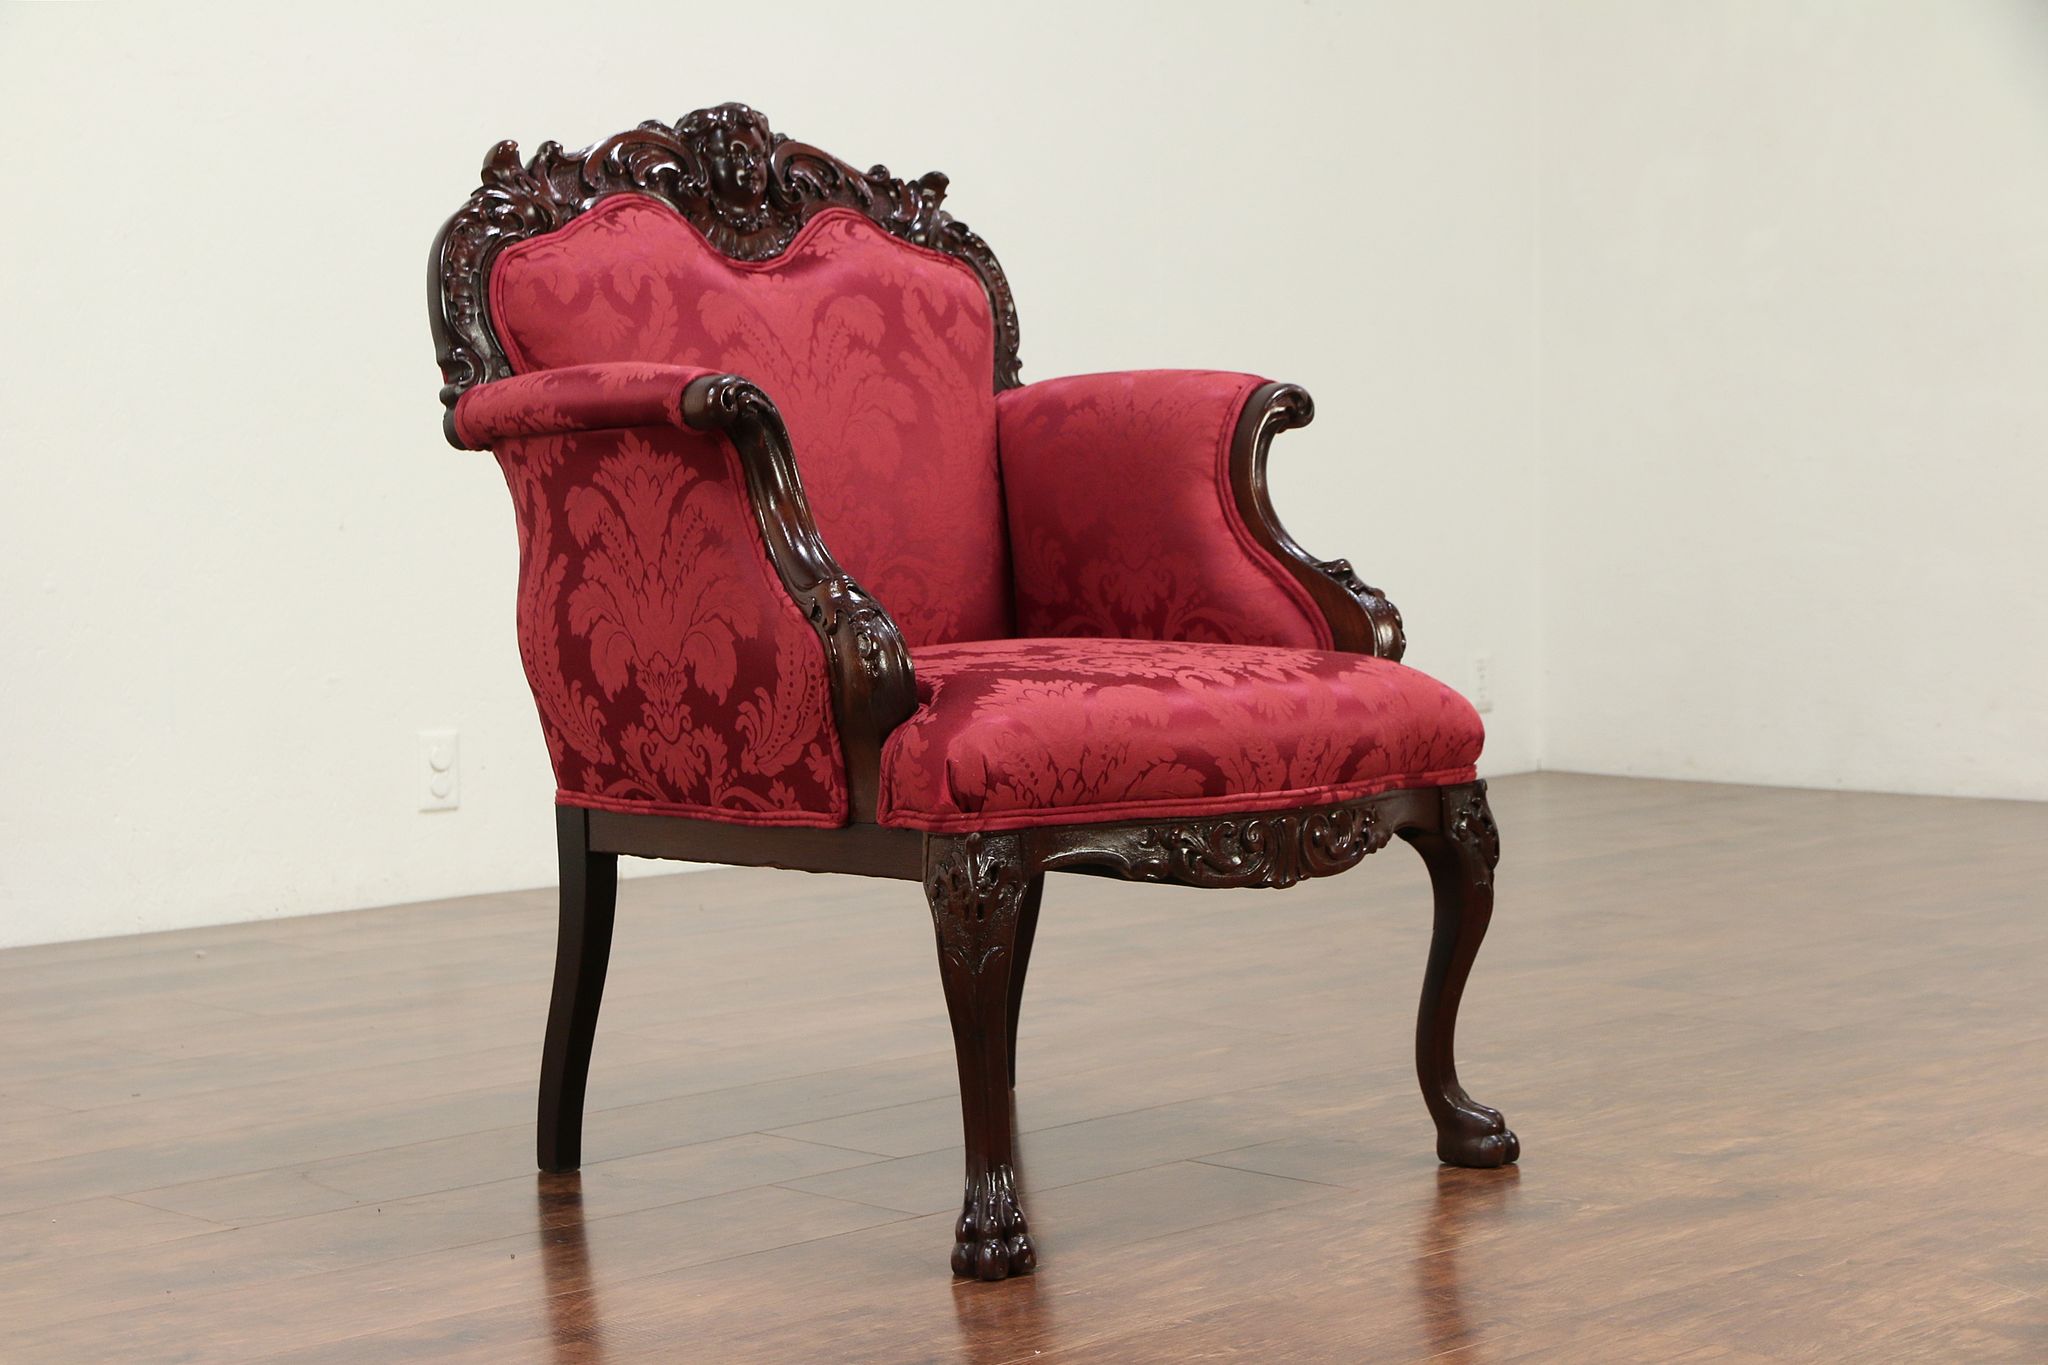 Sold Mahogany Antique Chair With Carved Face New Upholstery